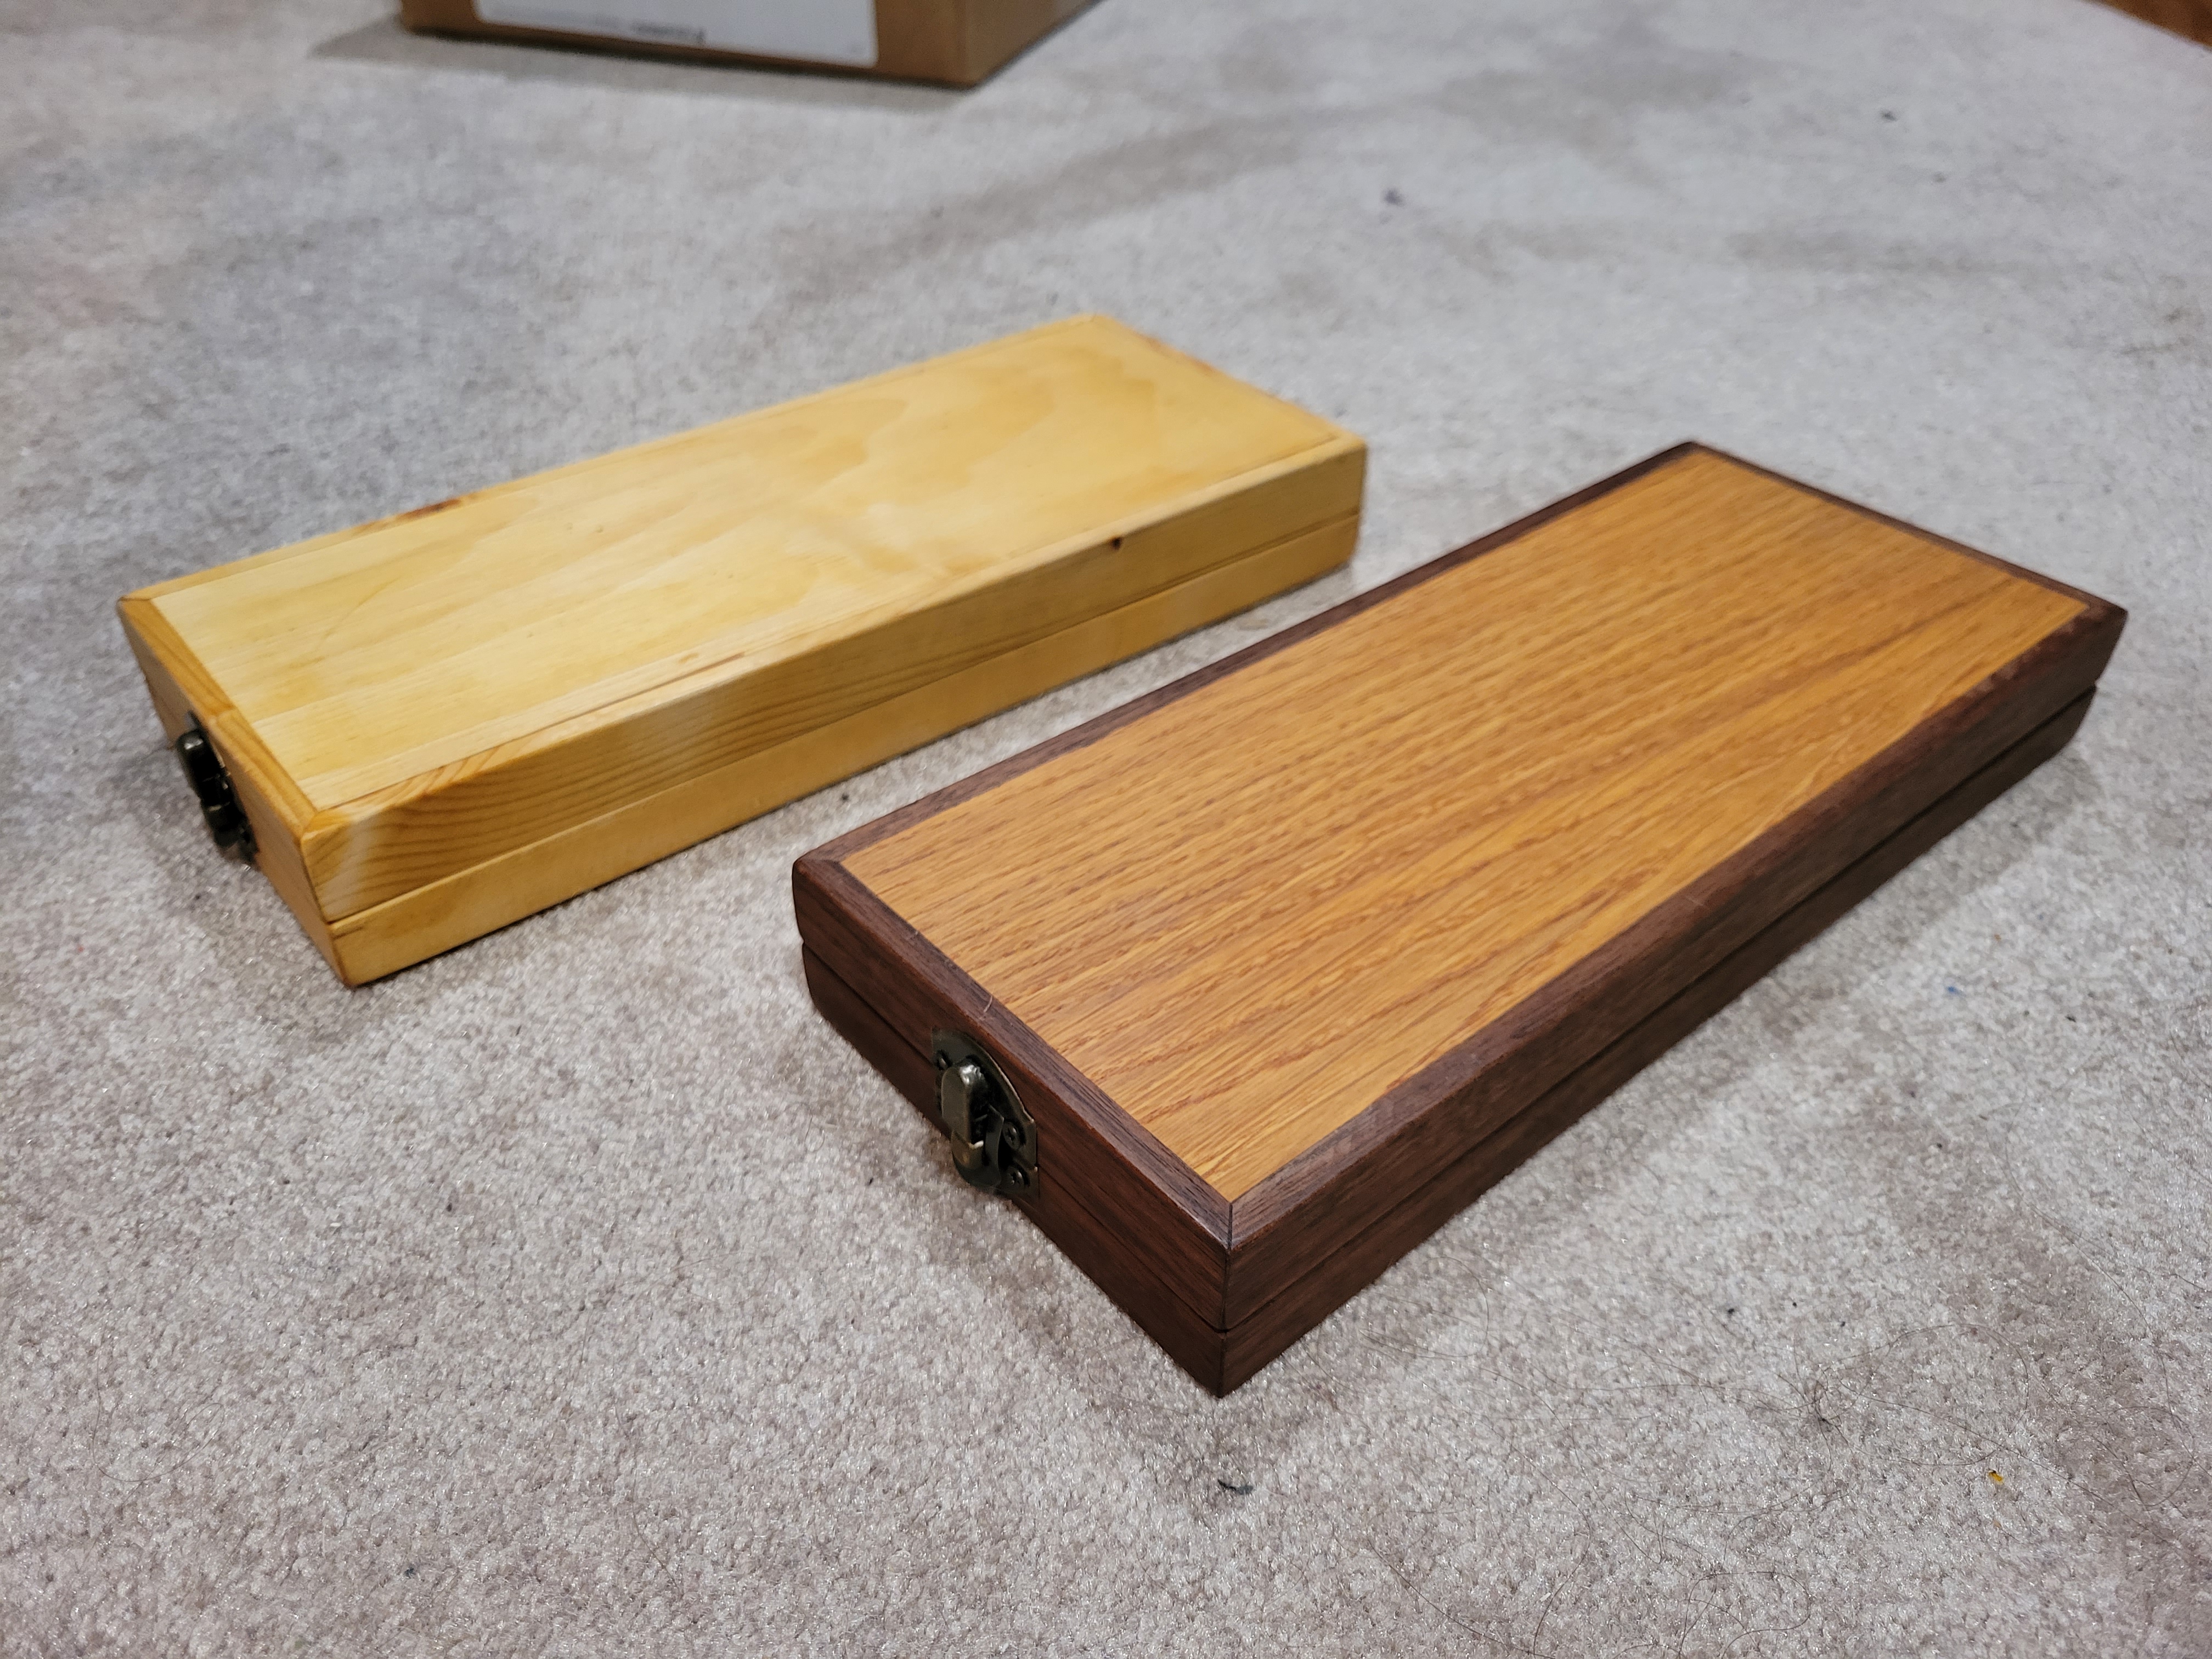 two boxes, one made of pine, the other of oak and walnut